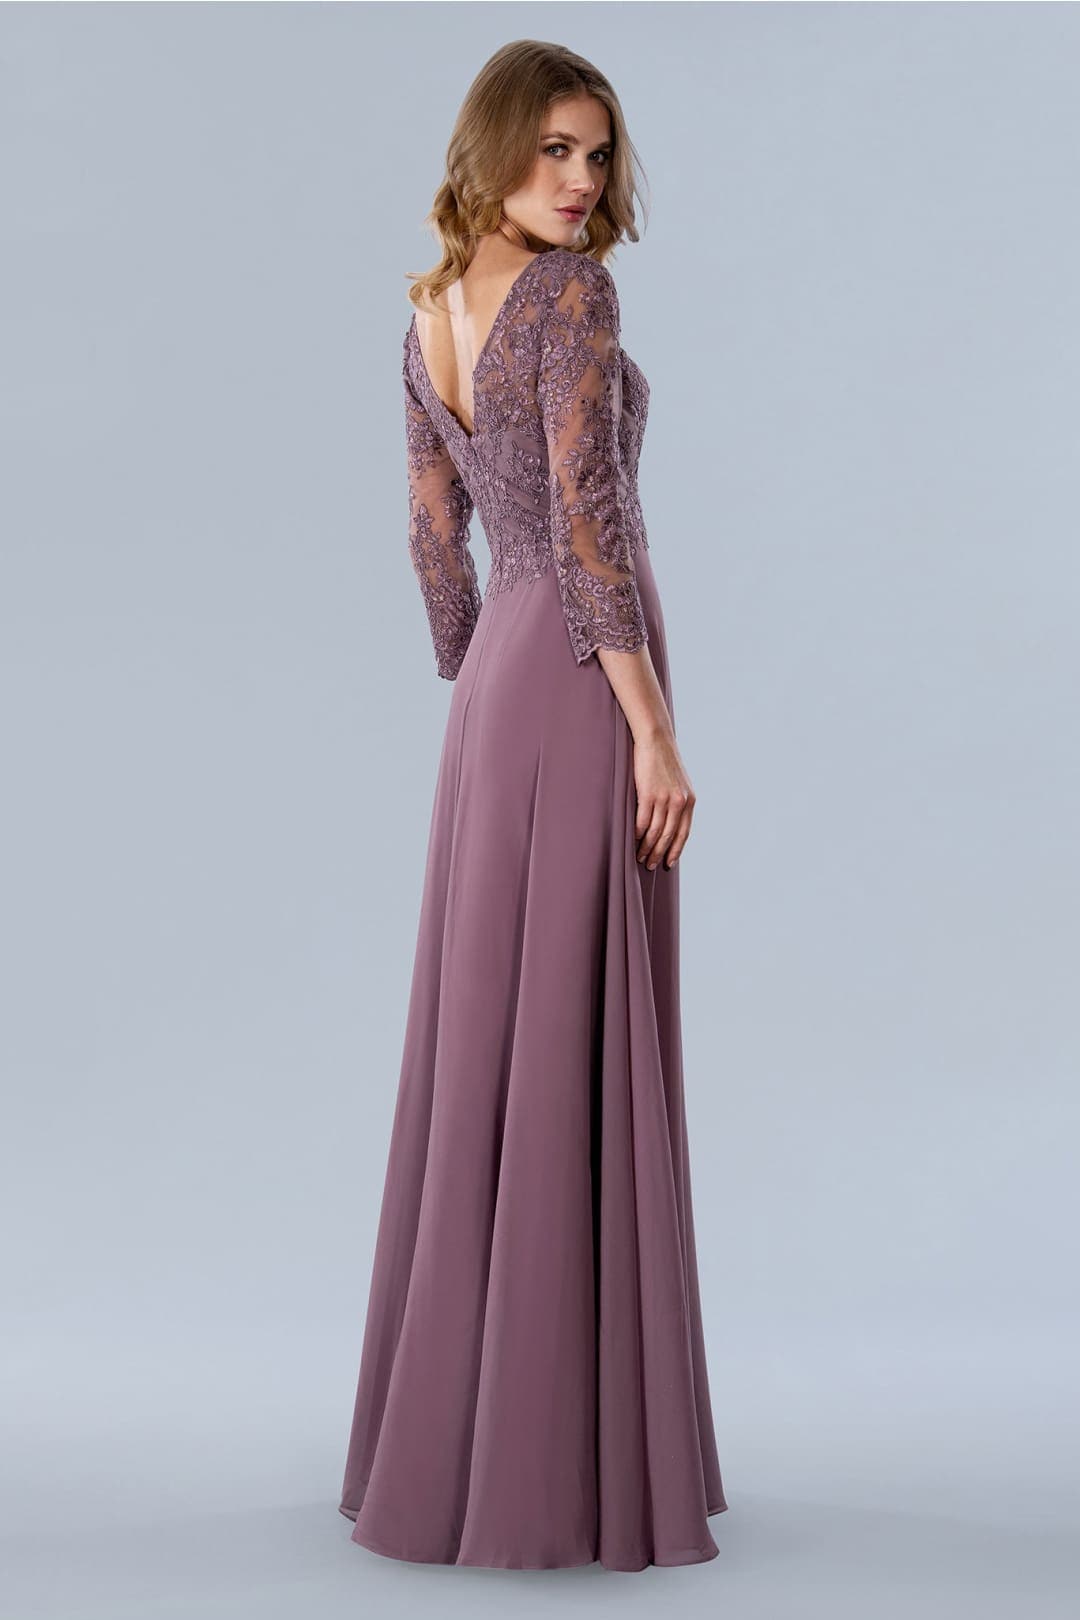 Stella Couture 23365 Long V-Neck Embroidered Evening Dress - Dresses